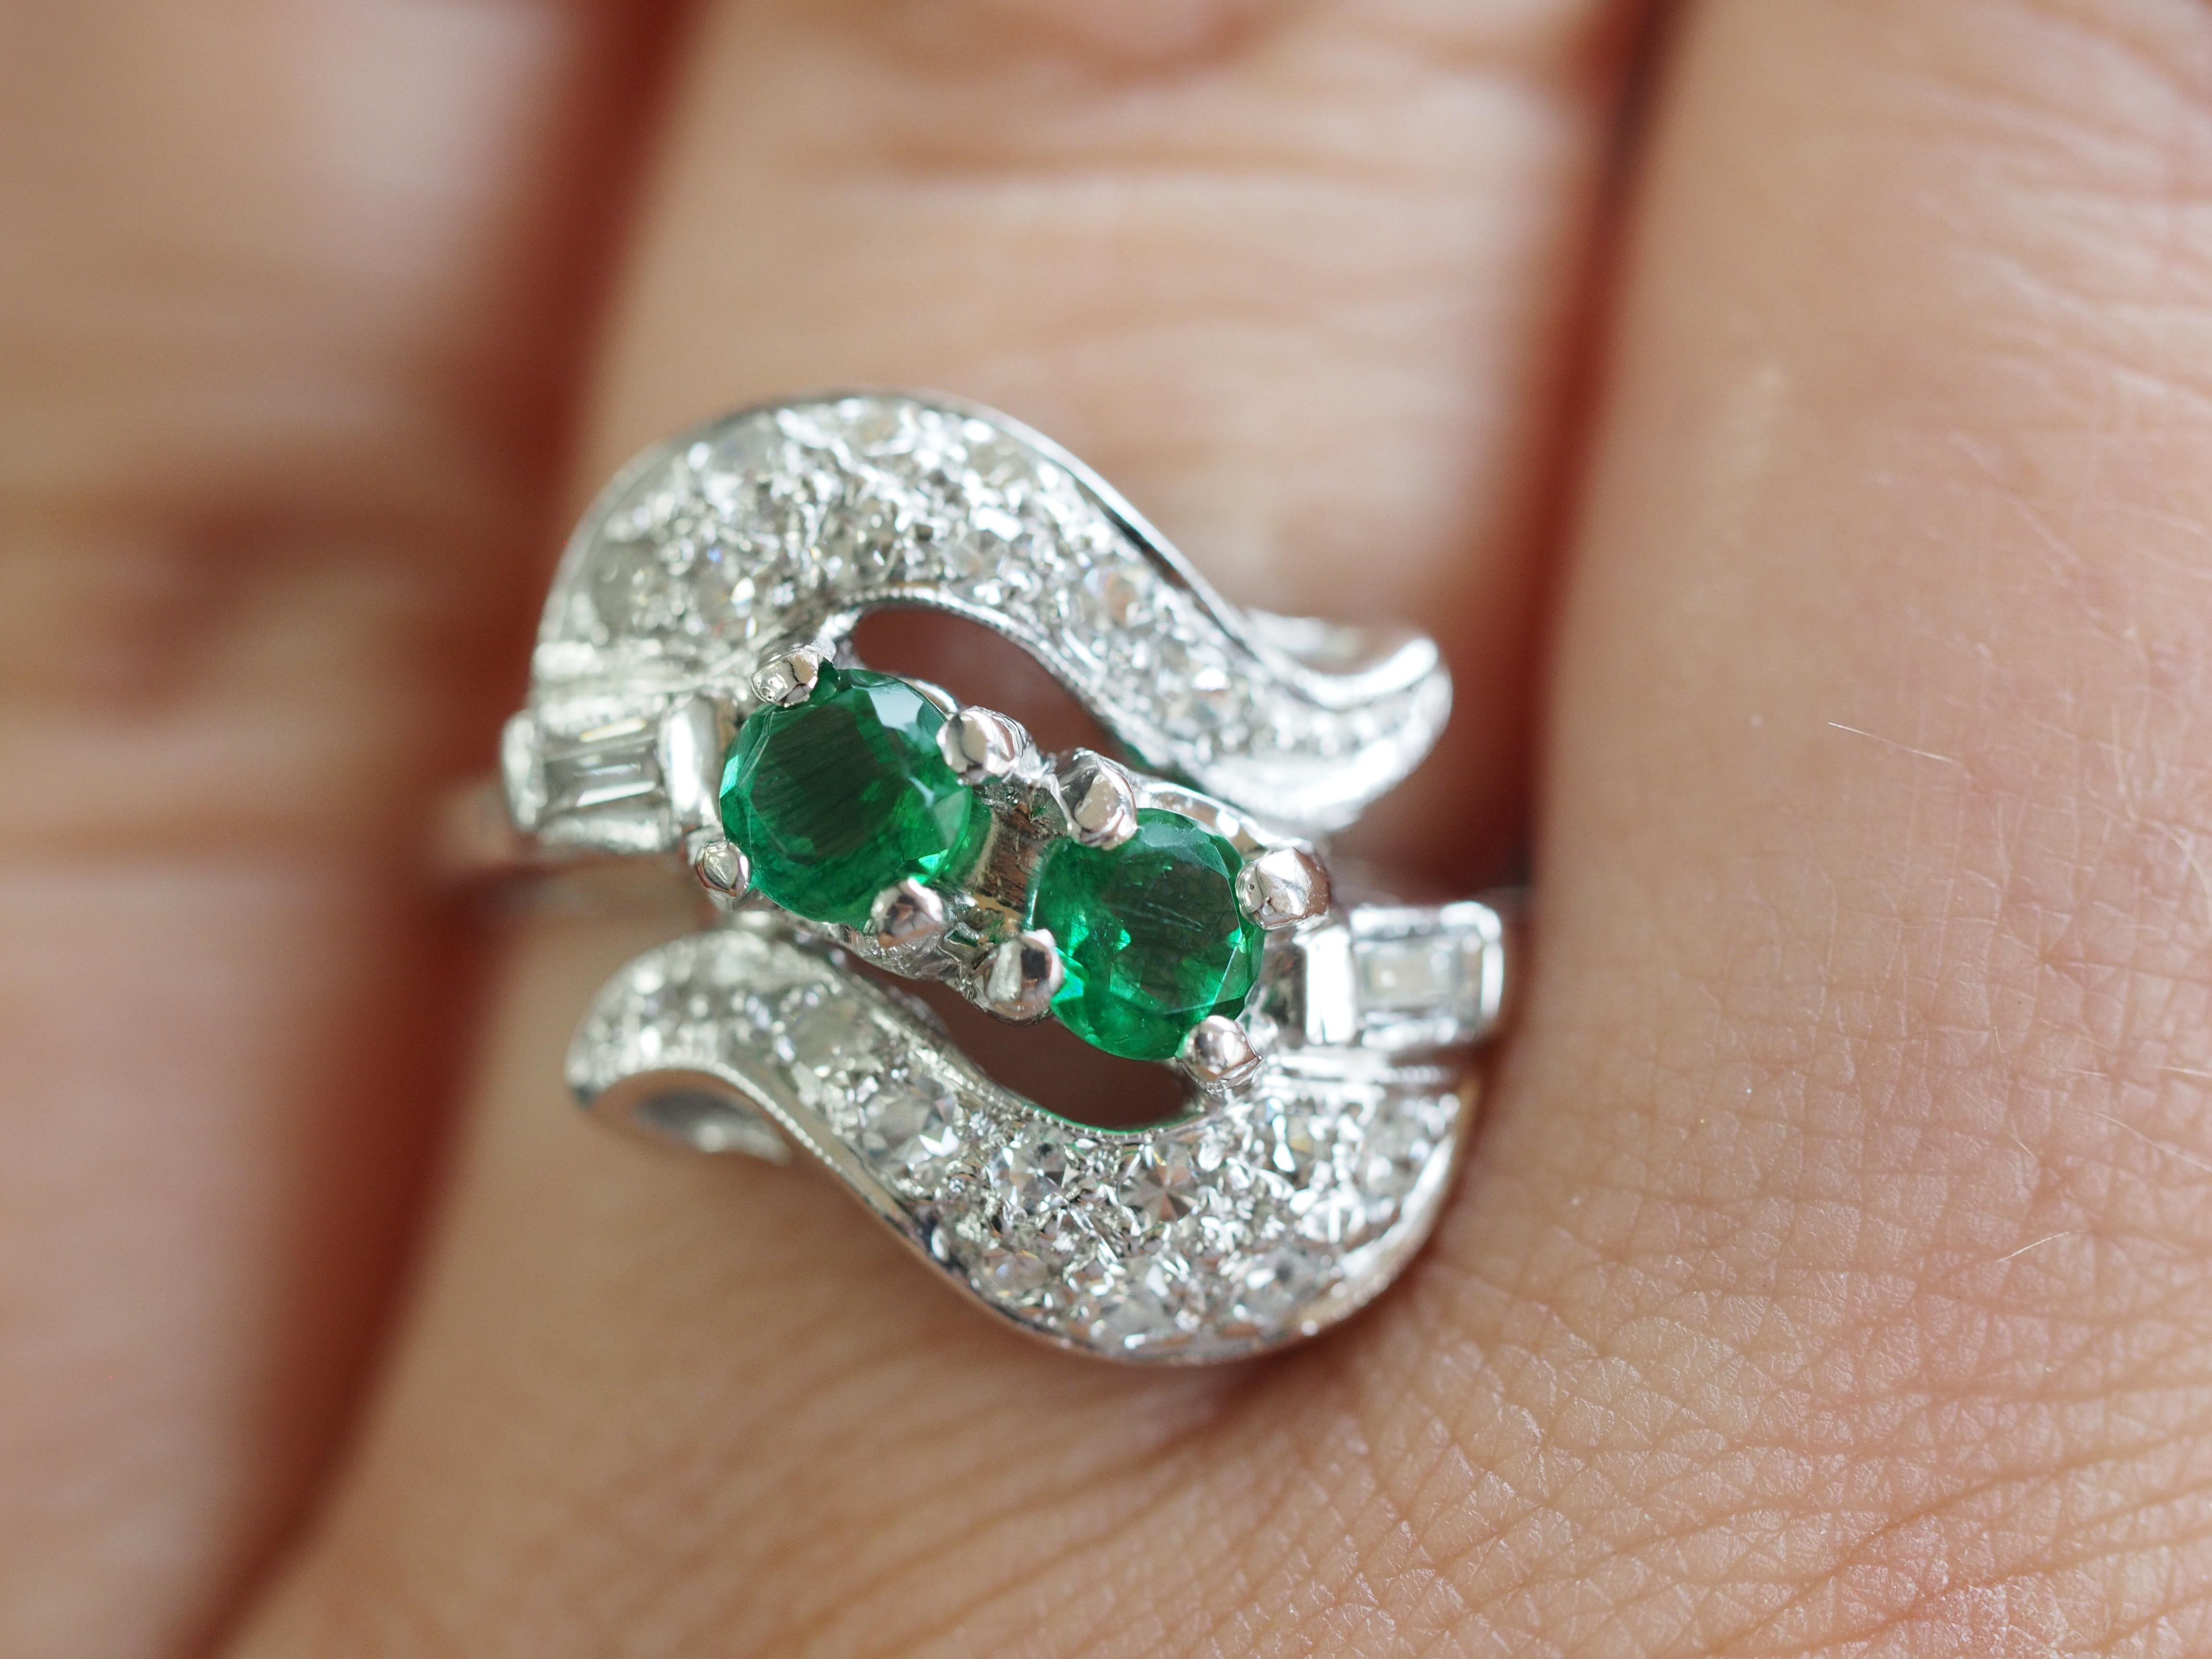 14K White Gold Two Emeralds and  Single Cut Diamond Ring. This ring is crafted in 14 karat white gold featuring with two round emeralds weighing approximately 0.6 carats, flanked by 18 single cut diamonds weighing approximately 0.3, H-I in color,